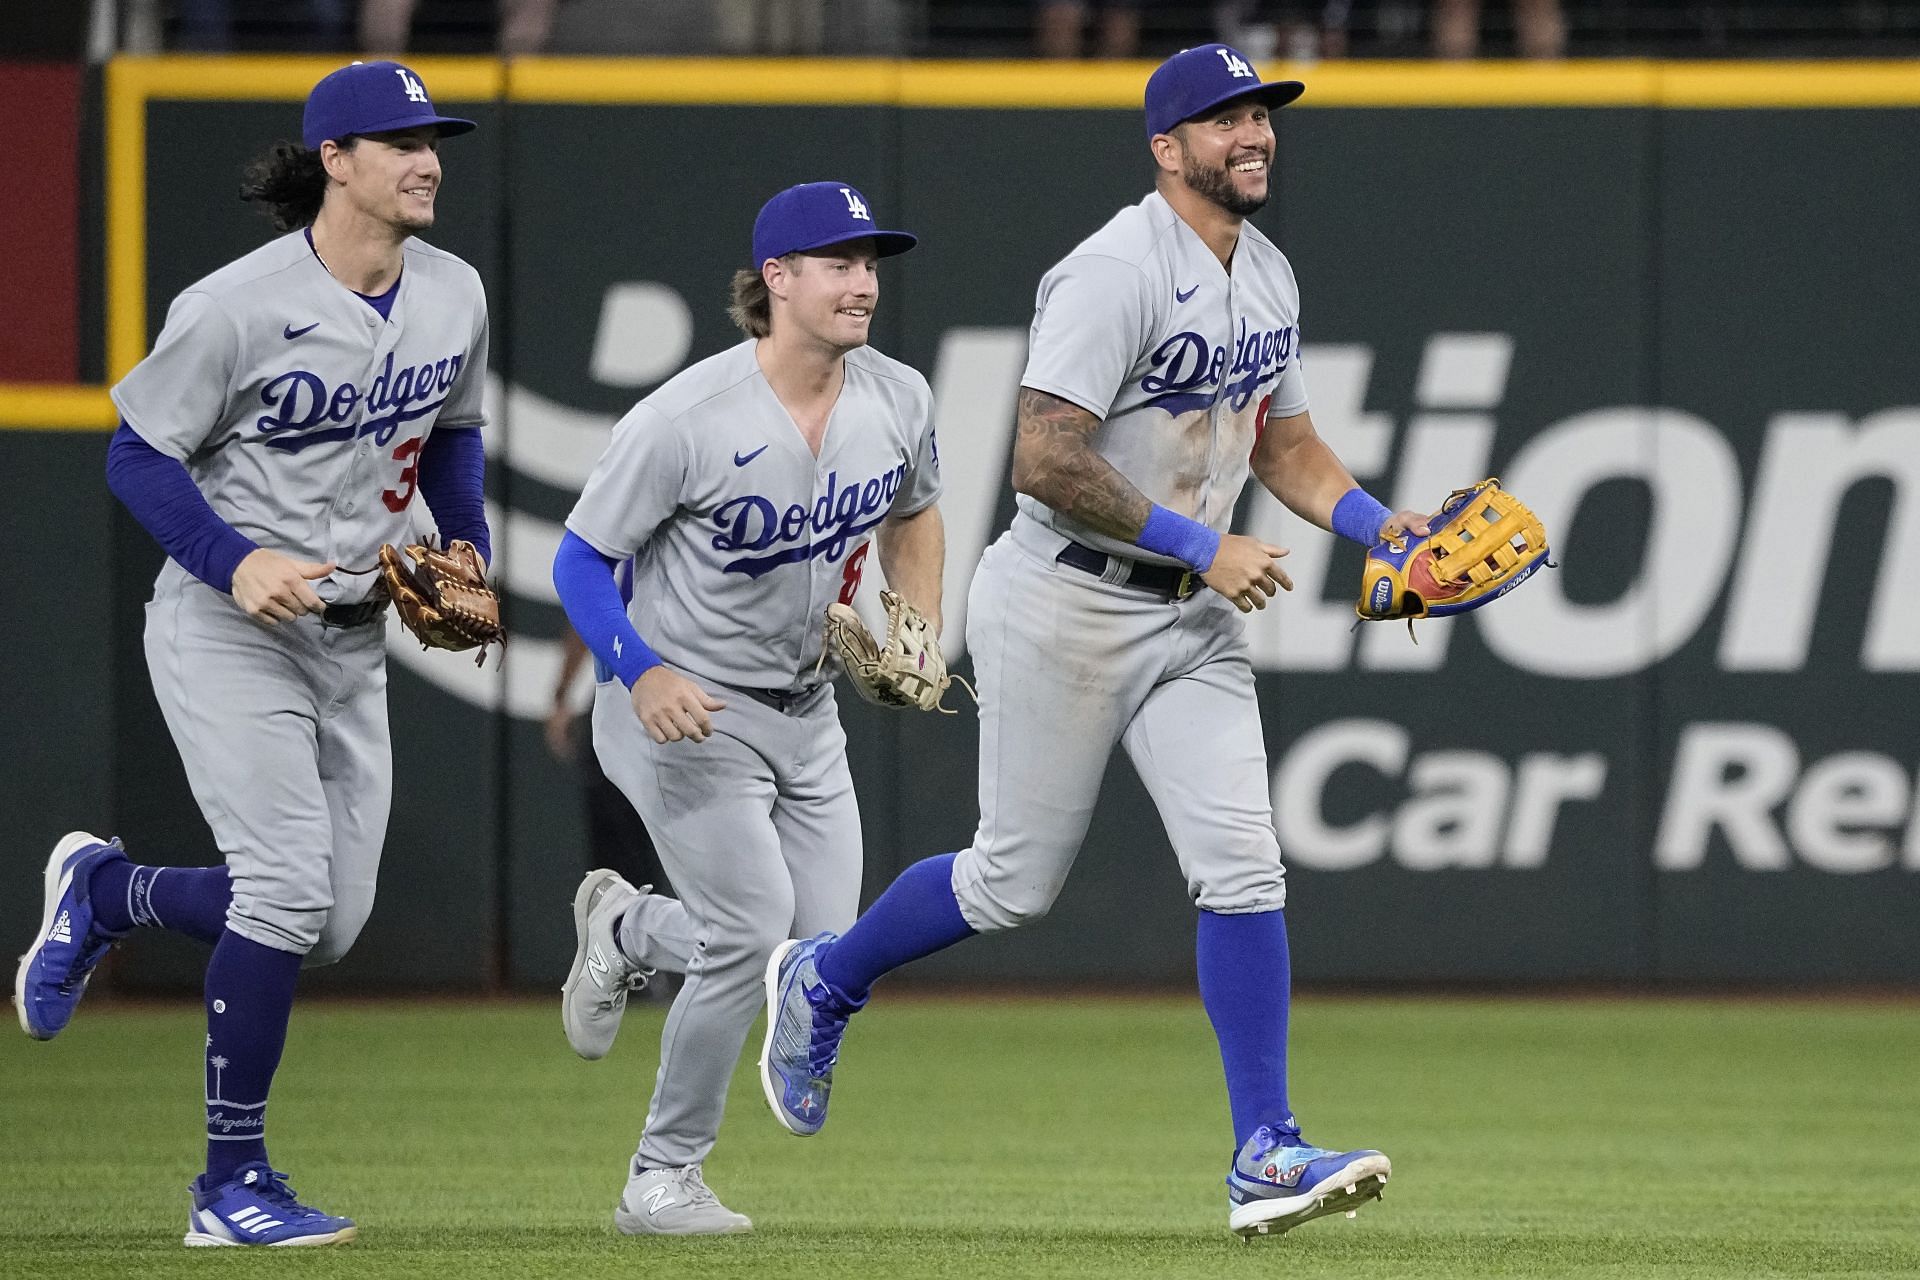 LAKERS NIGHT: September 1st, the @Dodgers are celebrating Lakers